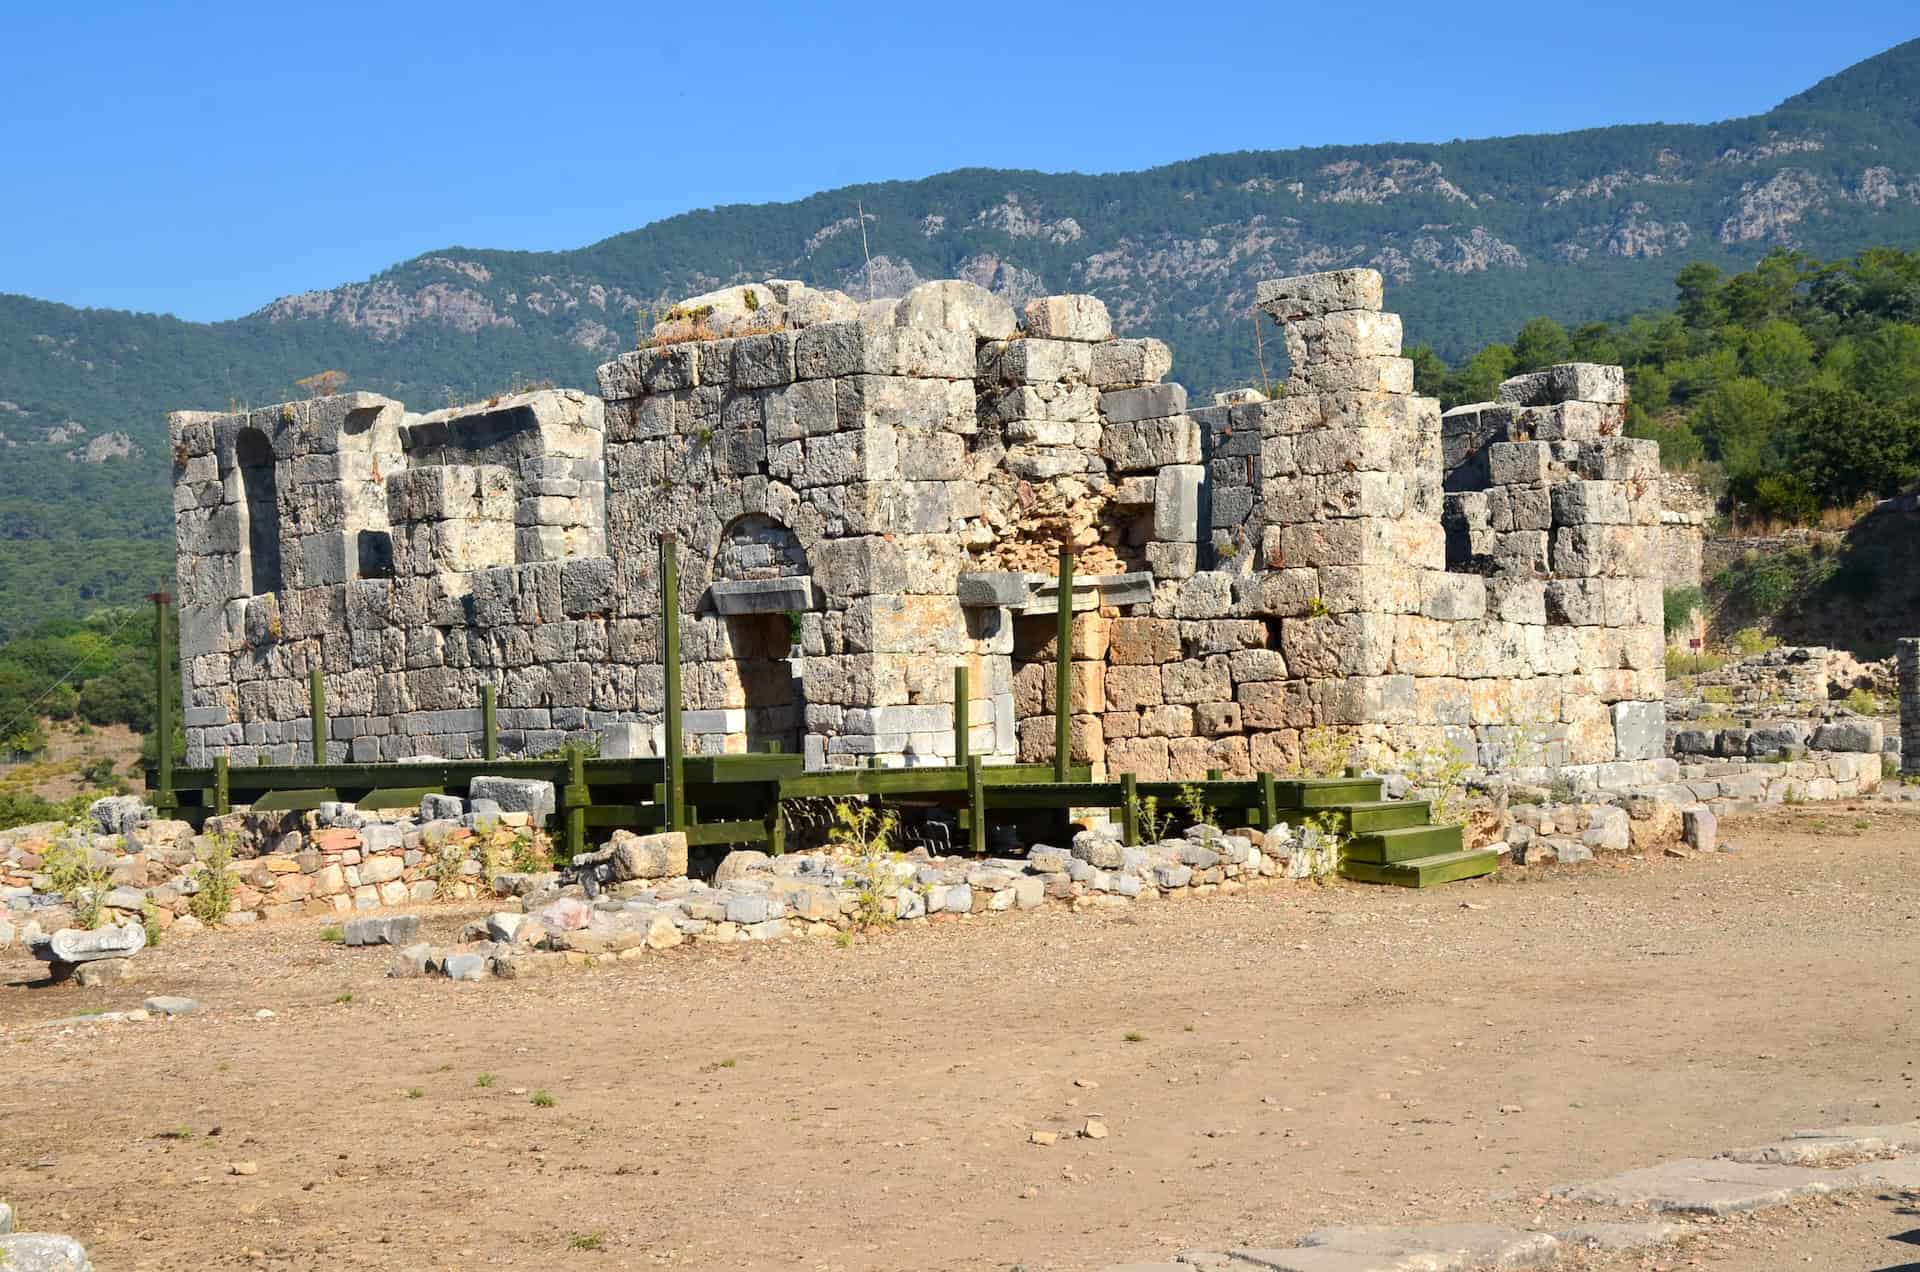 South side of the Domed Church at the Palaestra Terrace at Kaunos, Turkey